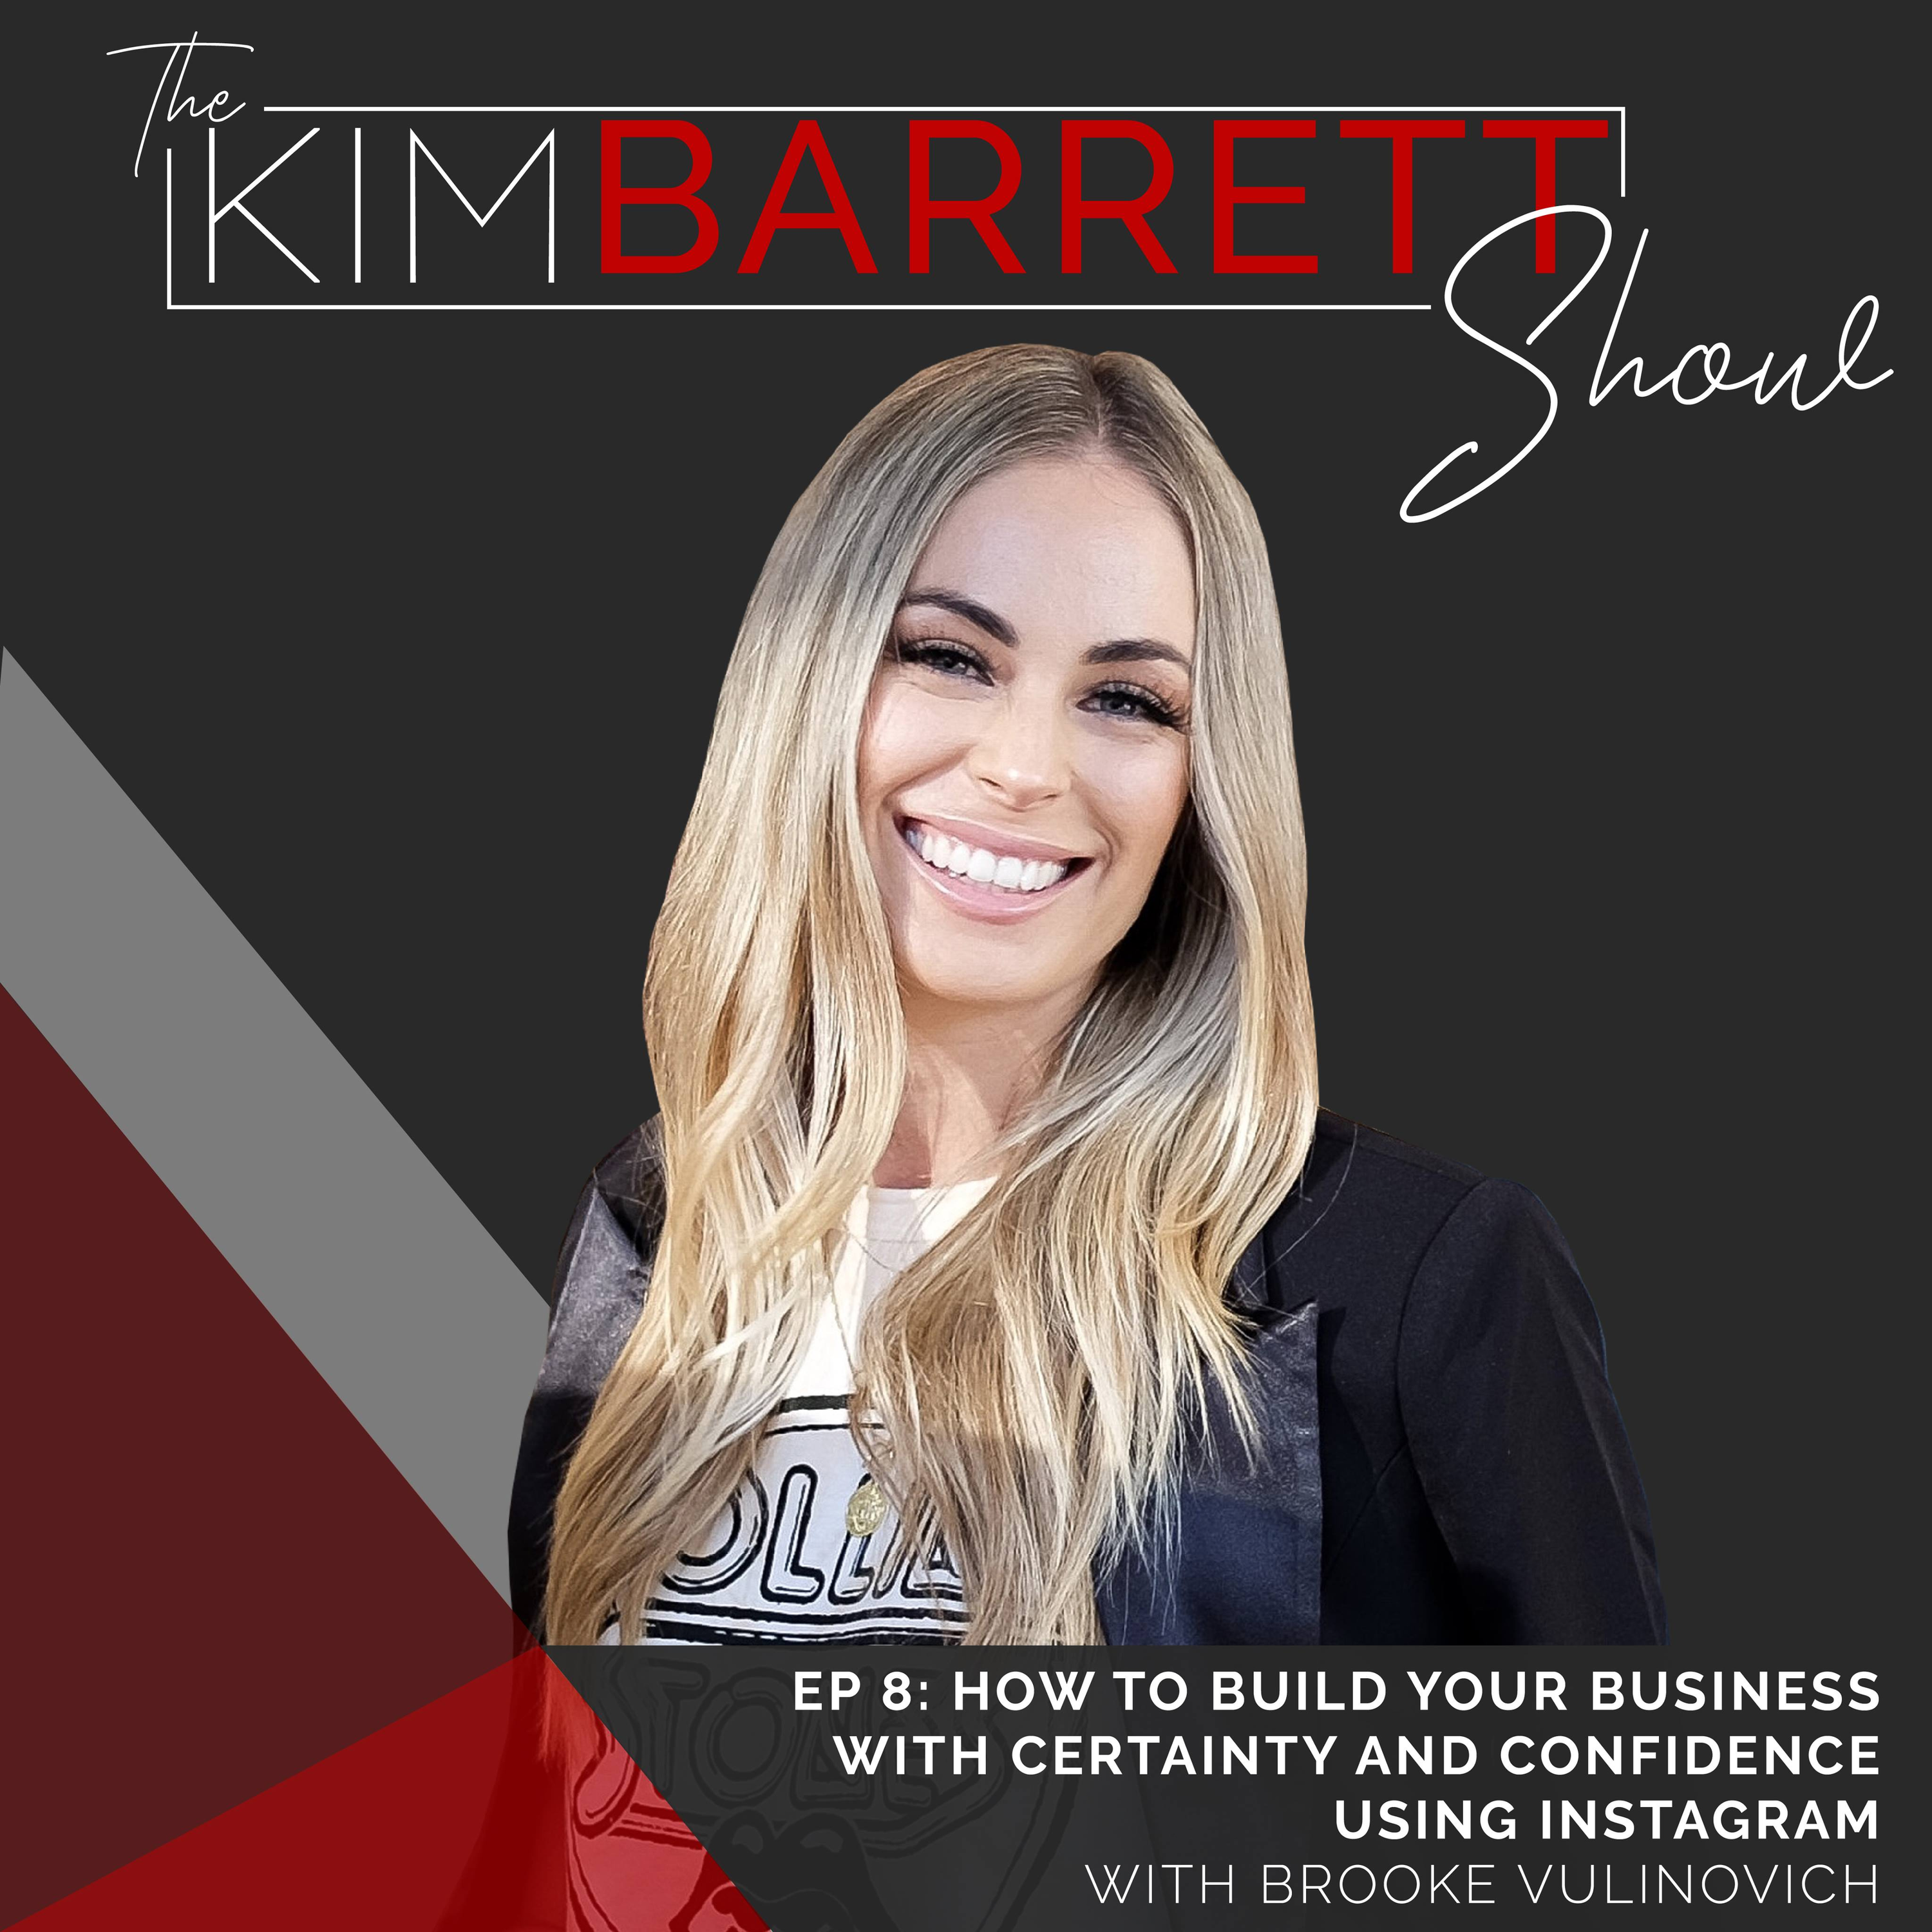 How to Build your Business with Certainty And Confidence using Instagram with Brooke Vulinovich